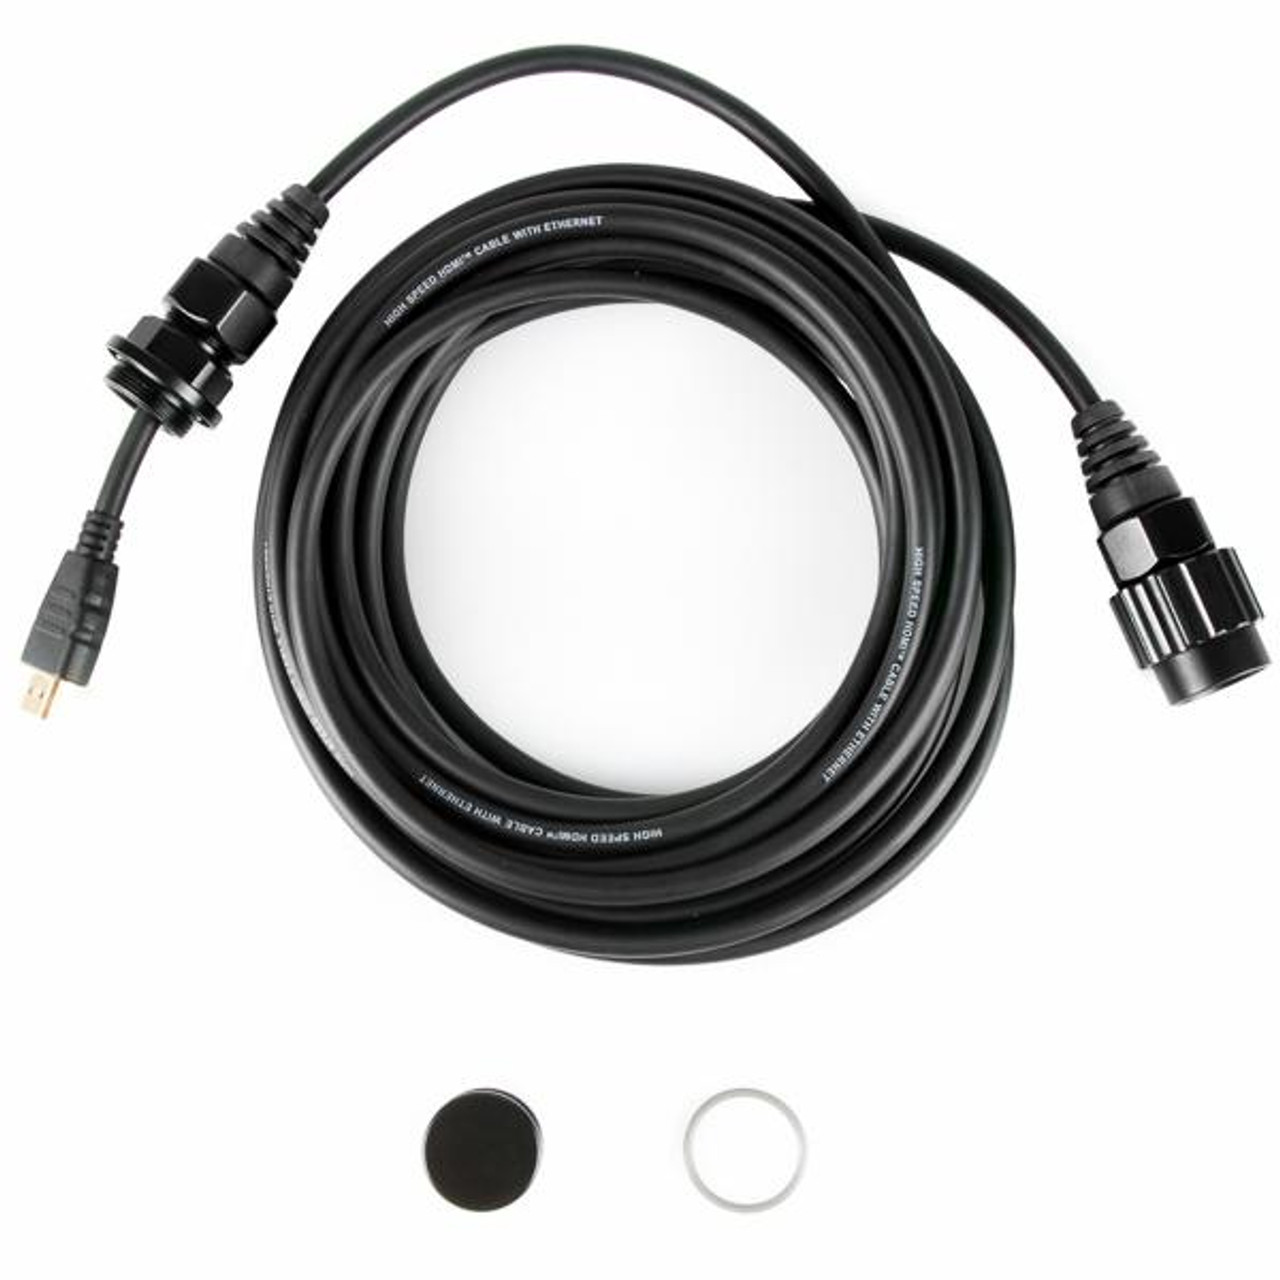 25040 HDMI (A-D) cable in 5000mm length (for connection from monitor housing to HDMI bulkhead)